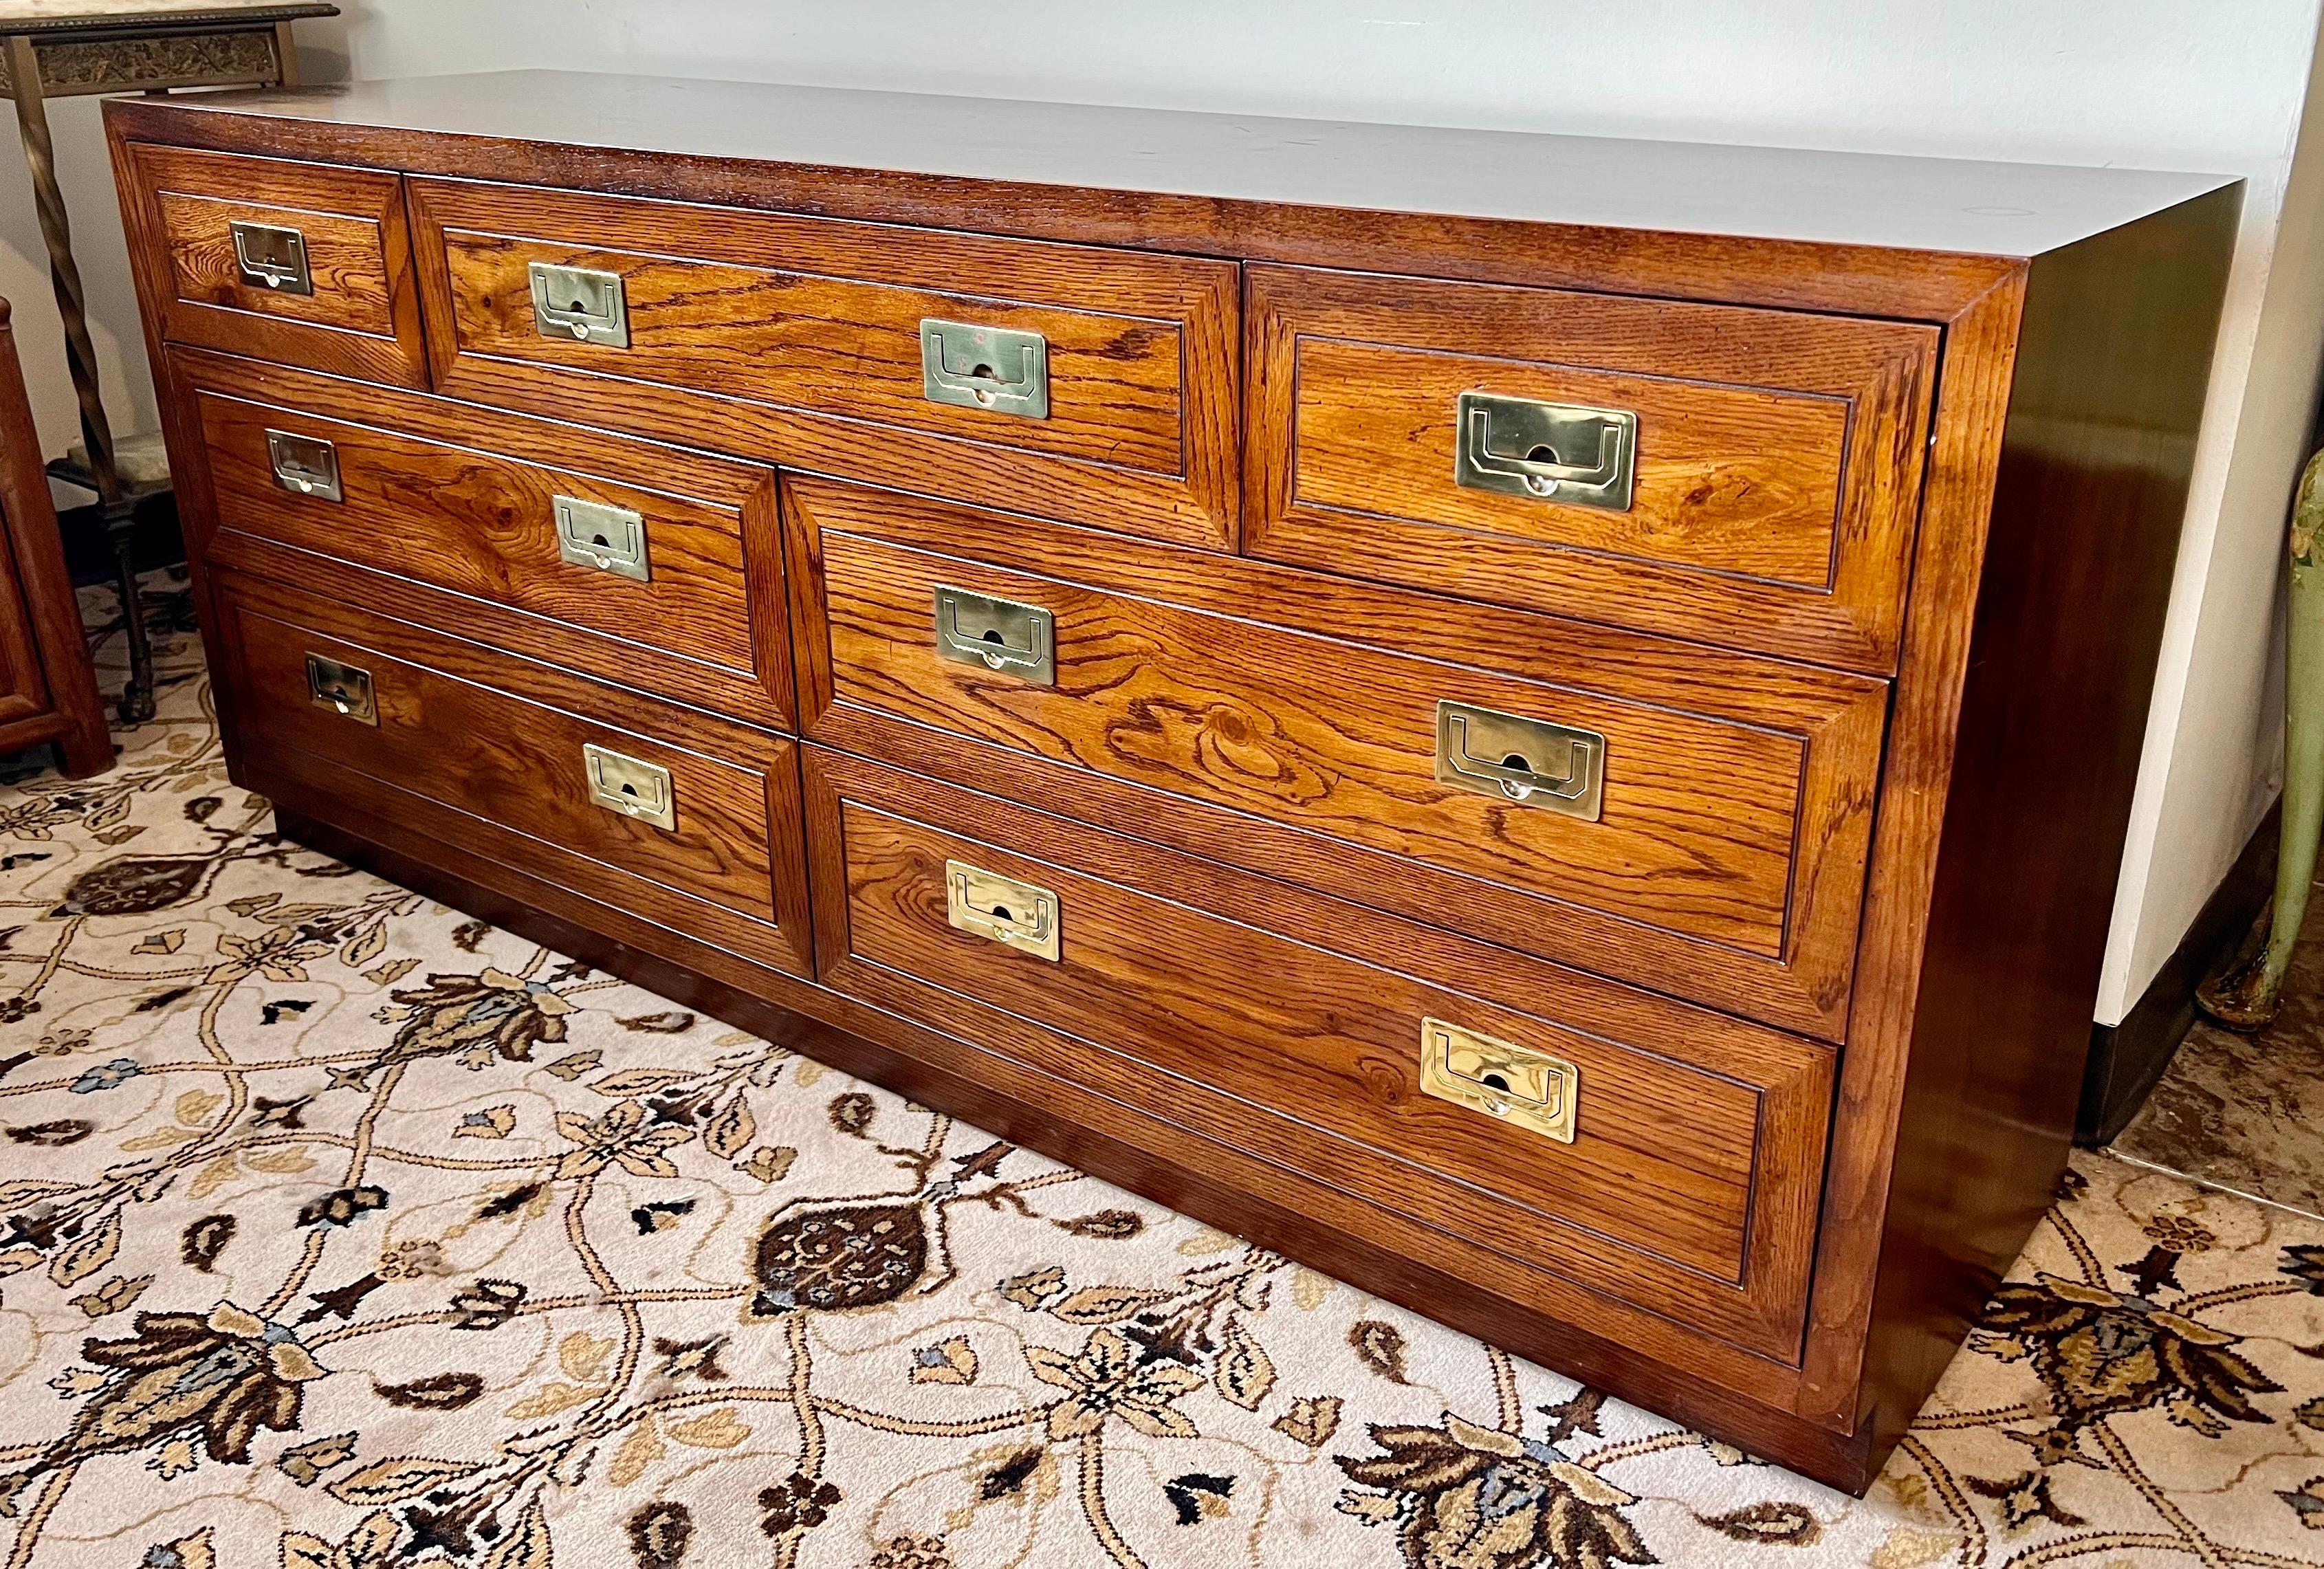 Midcentury classic Henredon campaign style walnut dresser has seven dovetailed drawers which include four larger drawers below and three smaller ones at the top to provide ample storage. Drawers are fitted with inset brass pulls. Interior of one